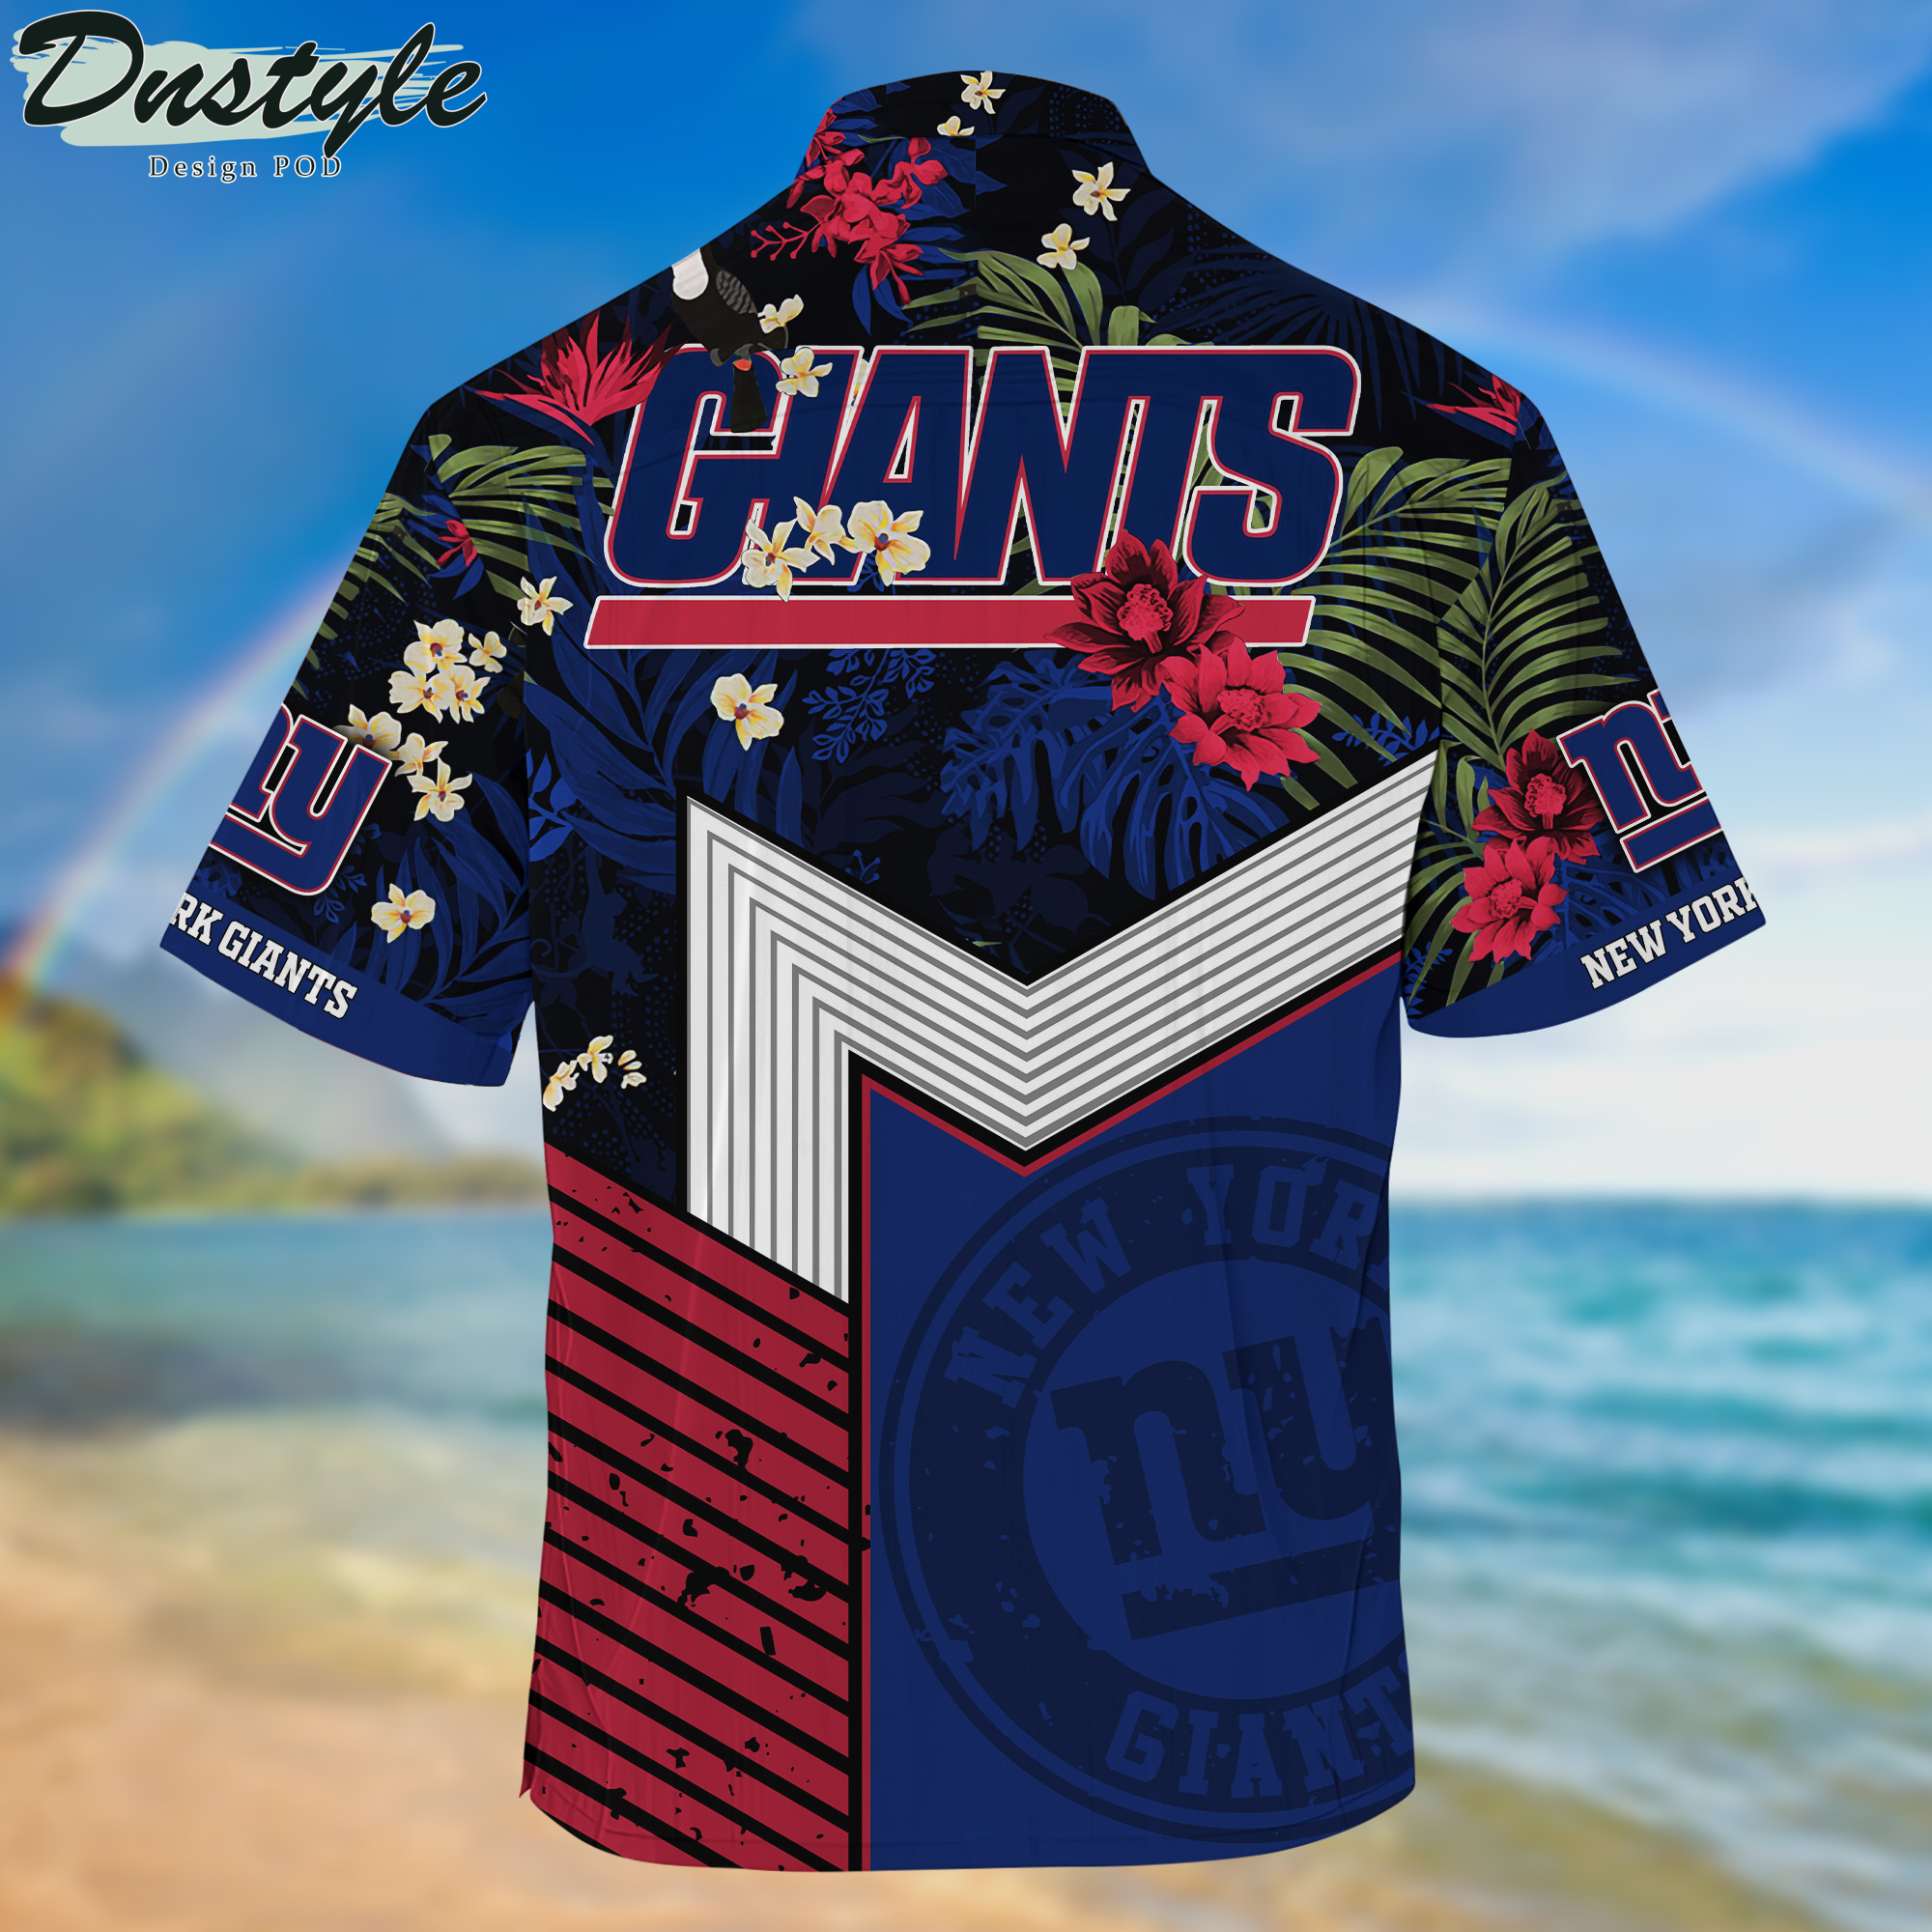 New York Giants Hawaii Shirt And Shorts New Collection